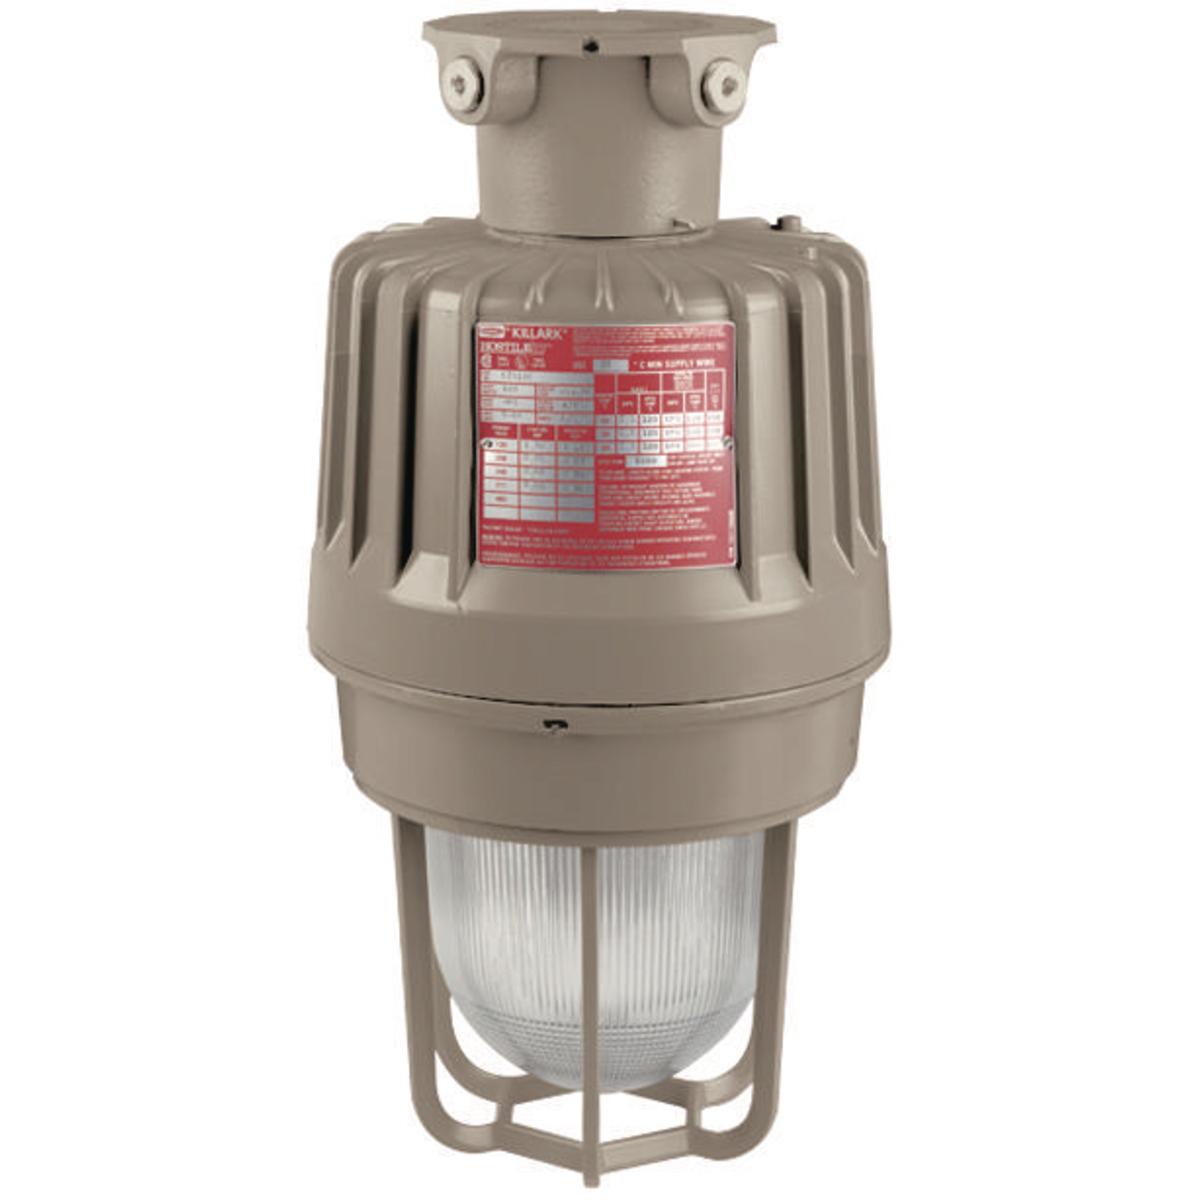 Hubbell EZS400X3G HID 400W Quadri-Volt High Pressure Sodium 1" Ceiling Mount with Guard  ; Three light sources – High Pressure Sodium (50-400W), Metal Halide (70-400W) and Pulse Start Metal Halide (175-400W) ; Mounting choice –Pendant, ceiling, 25˚ stanchion or 90˚ wall mo